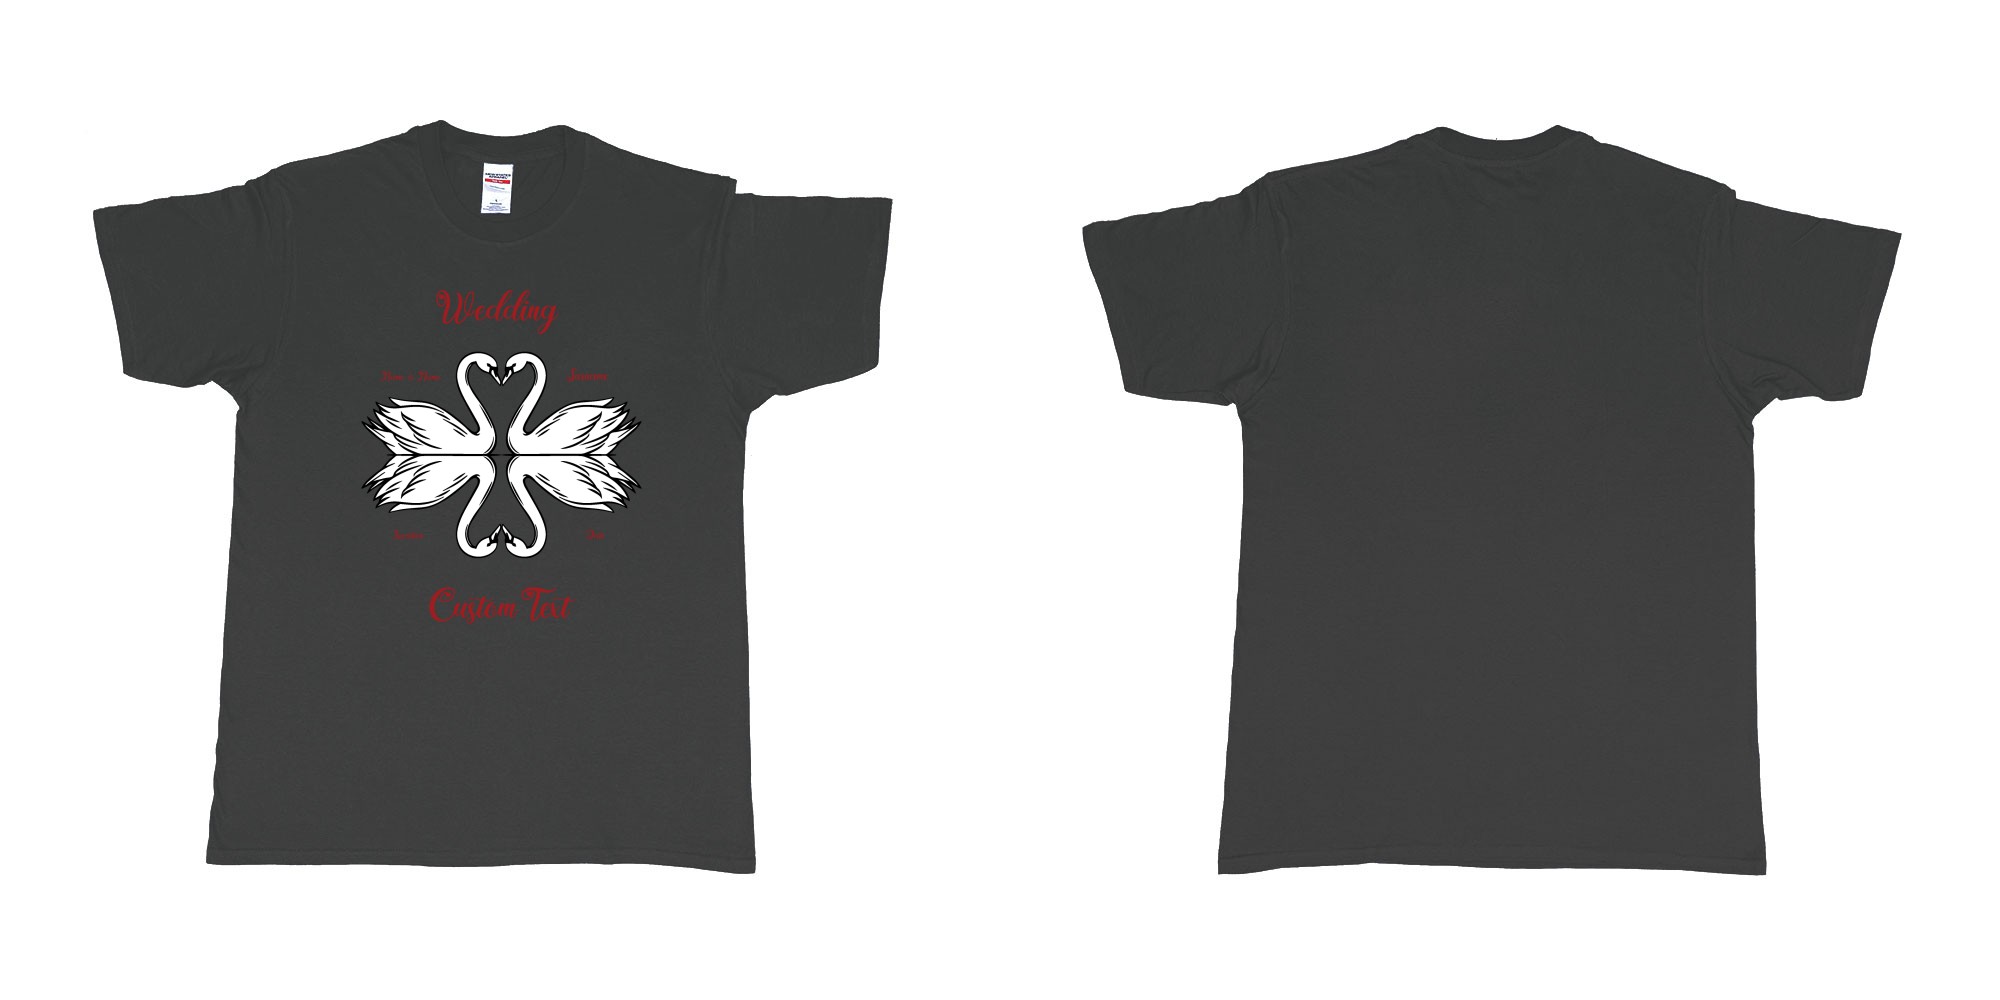 Custom tshirt design swans hearts reflection in fabric color black choice your own text made in Bali by The Pirate Way